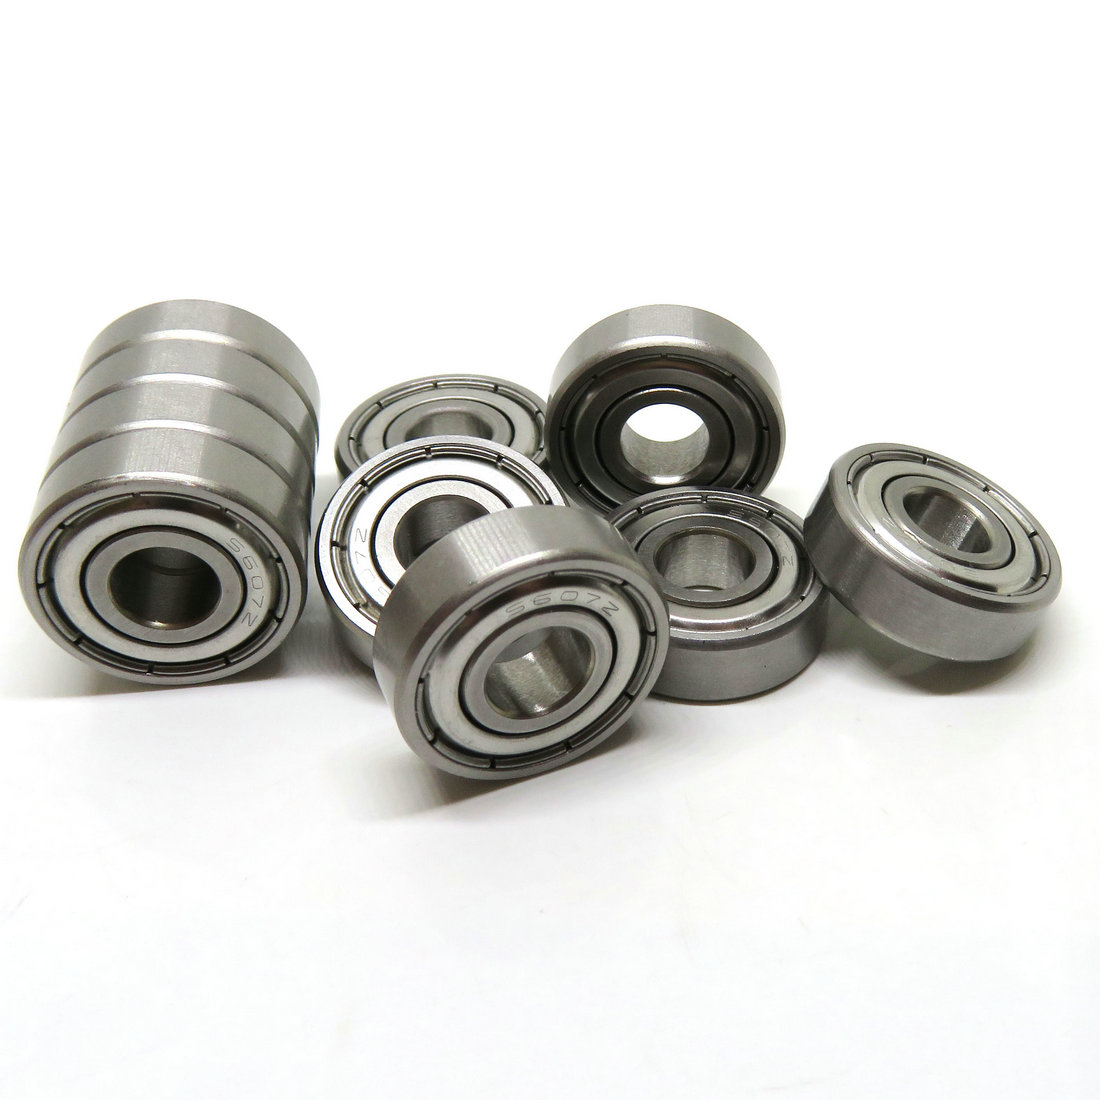 Food Processing S607ZZ Small Stainless Steel Bearings 7mm Bore 7x19x6 Stainless Steel Shielded Ball Bearing.jpg